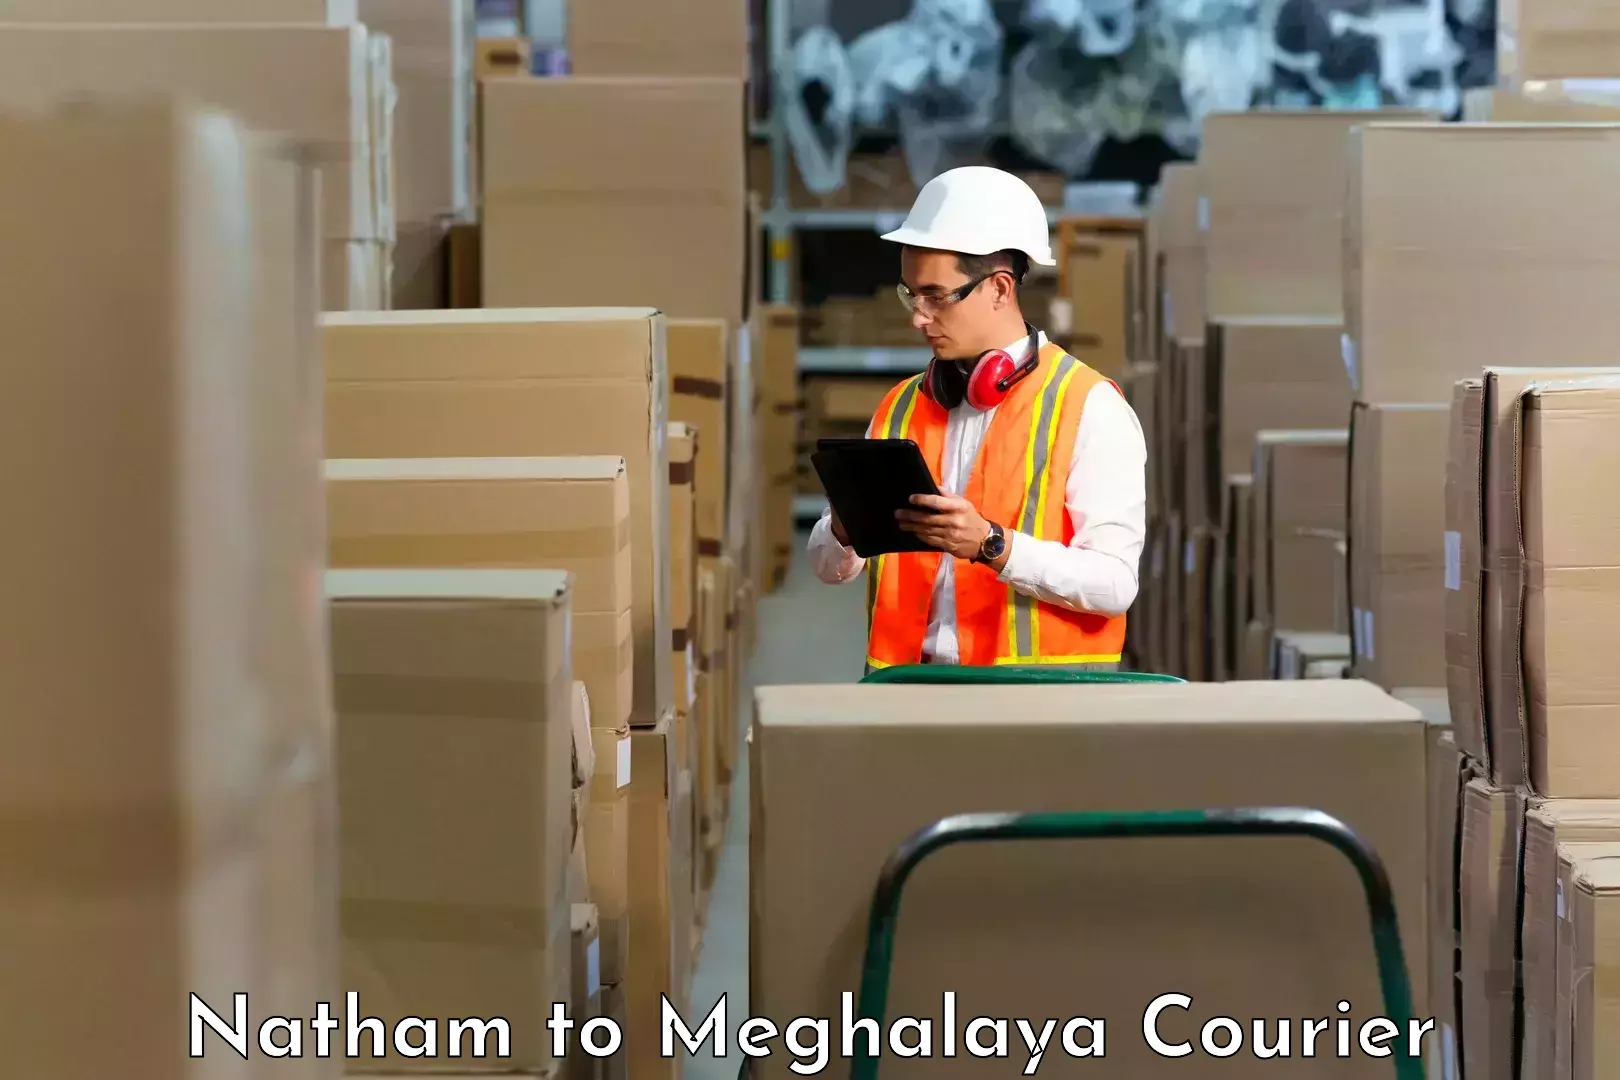 State-of-the-art courier technology Natham to Garobadha